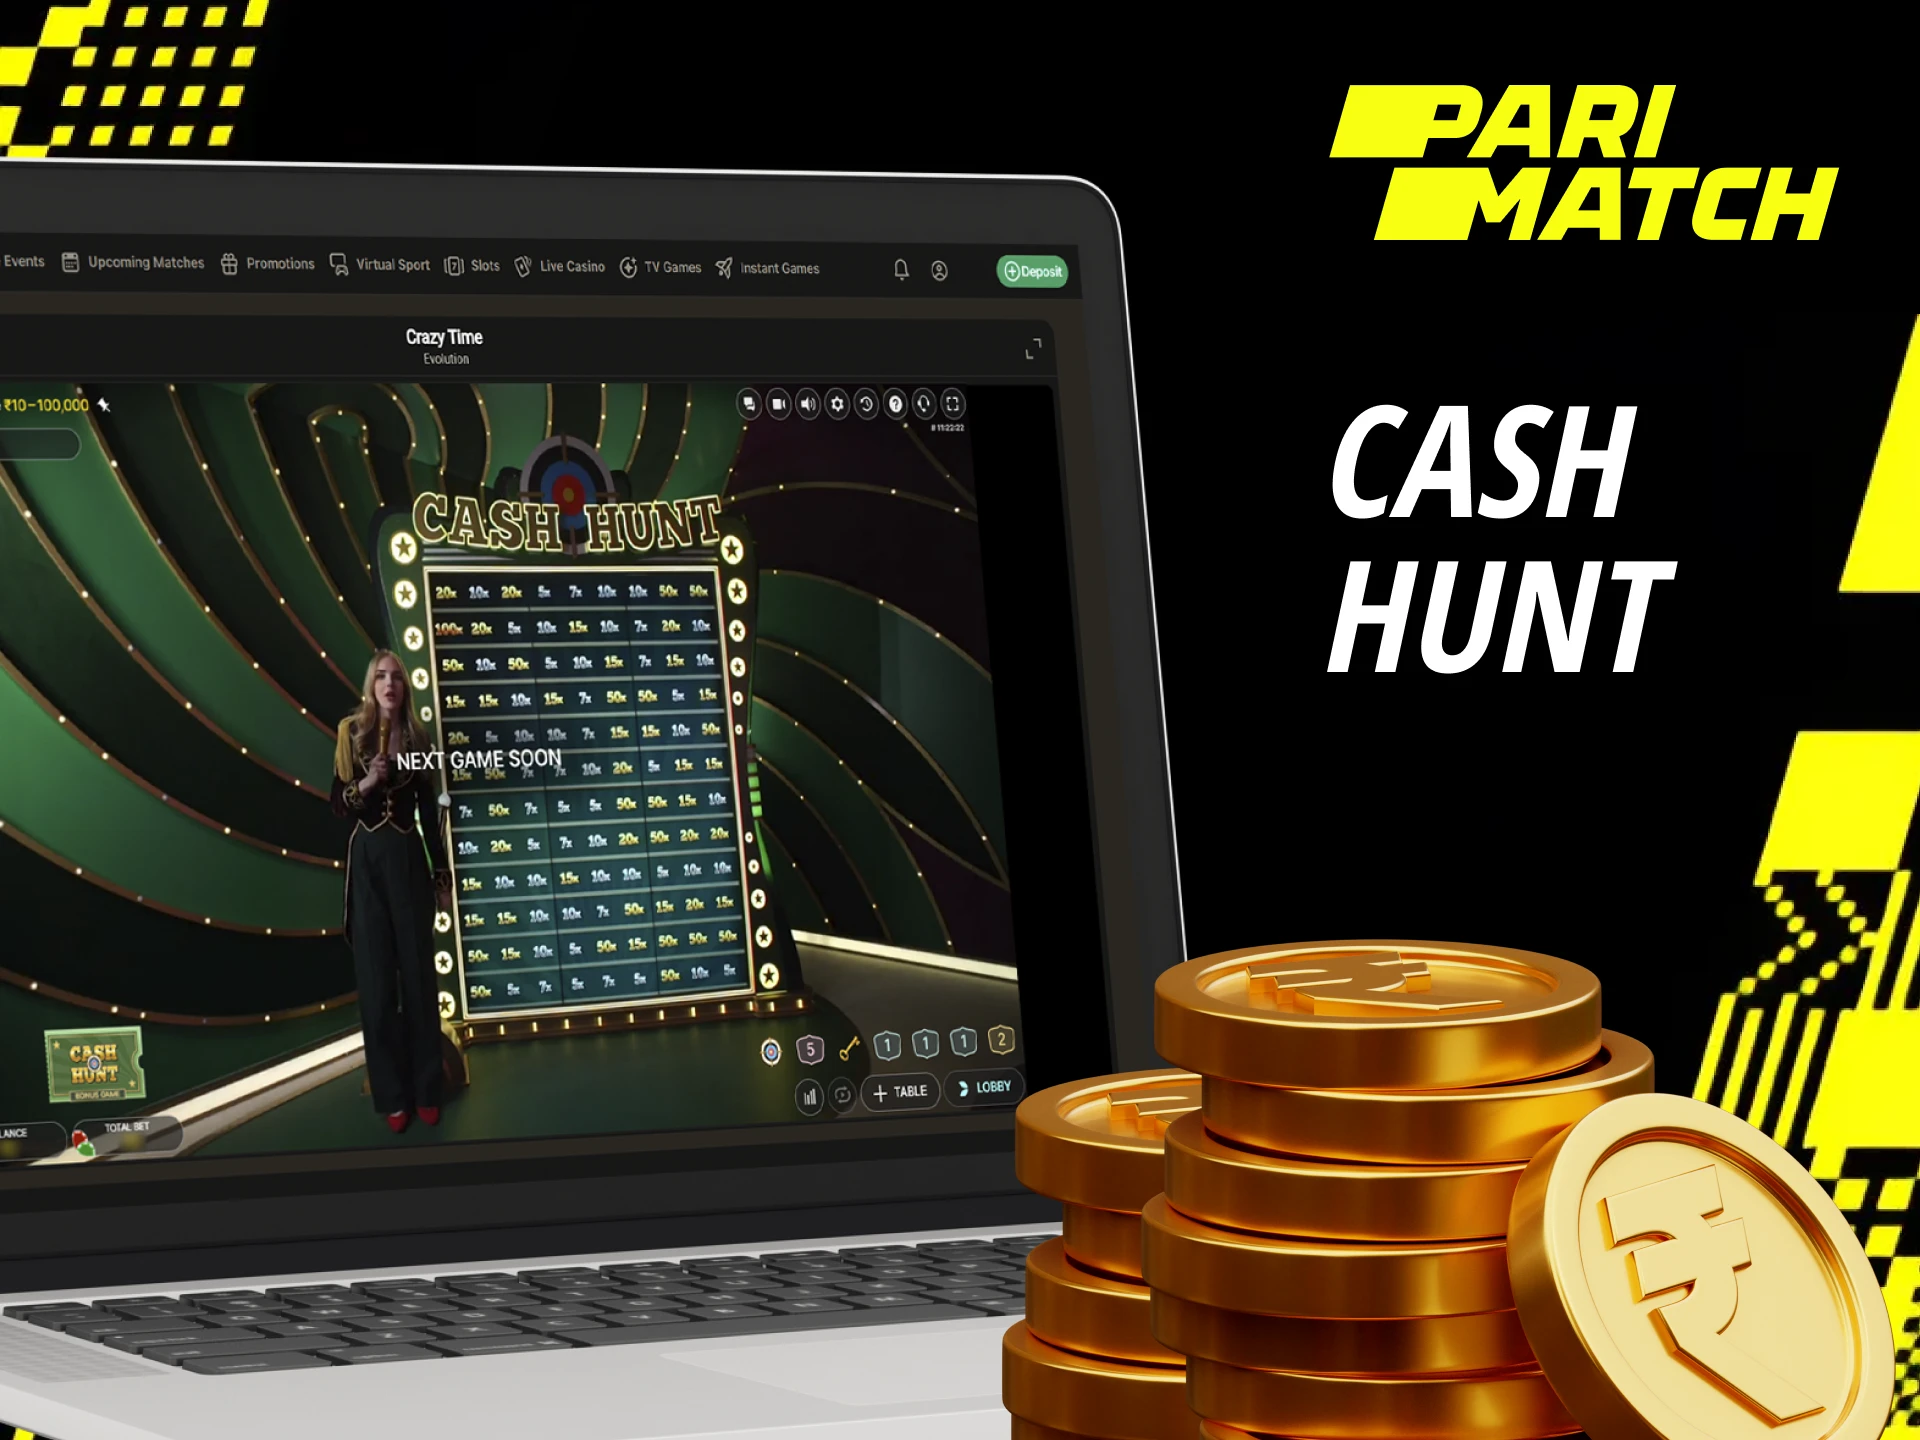 With the Parimatch Crazy Time Cash Hunt bonus game you can increase your winnings.